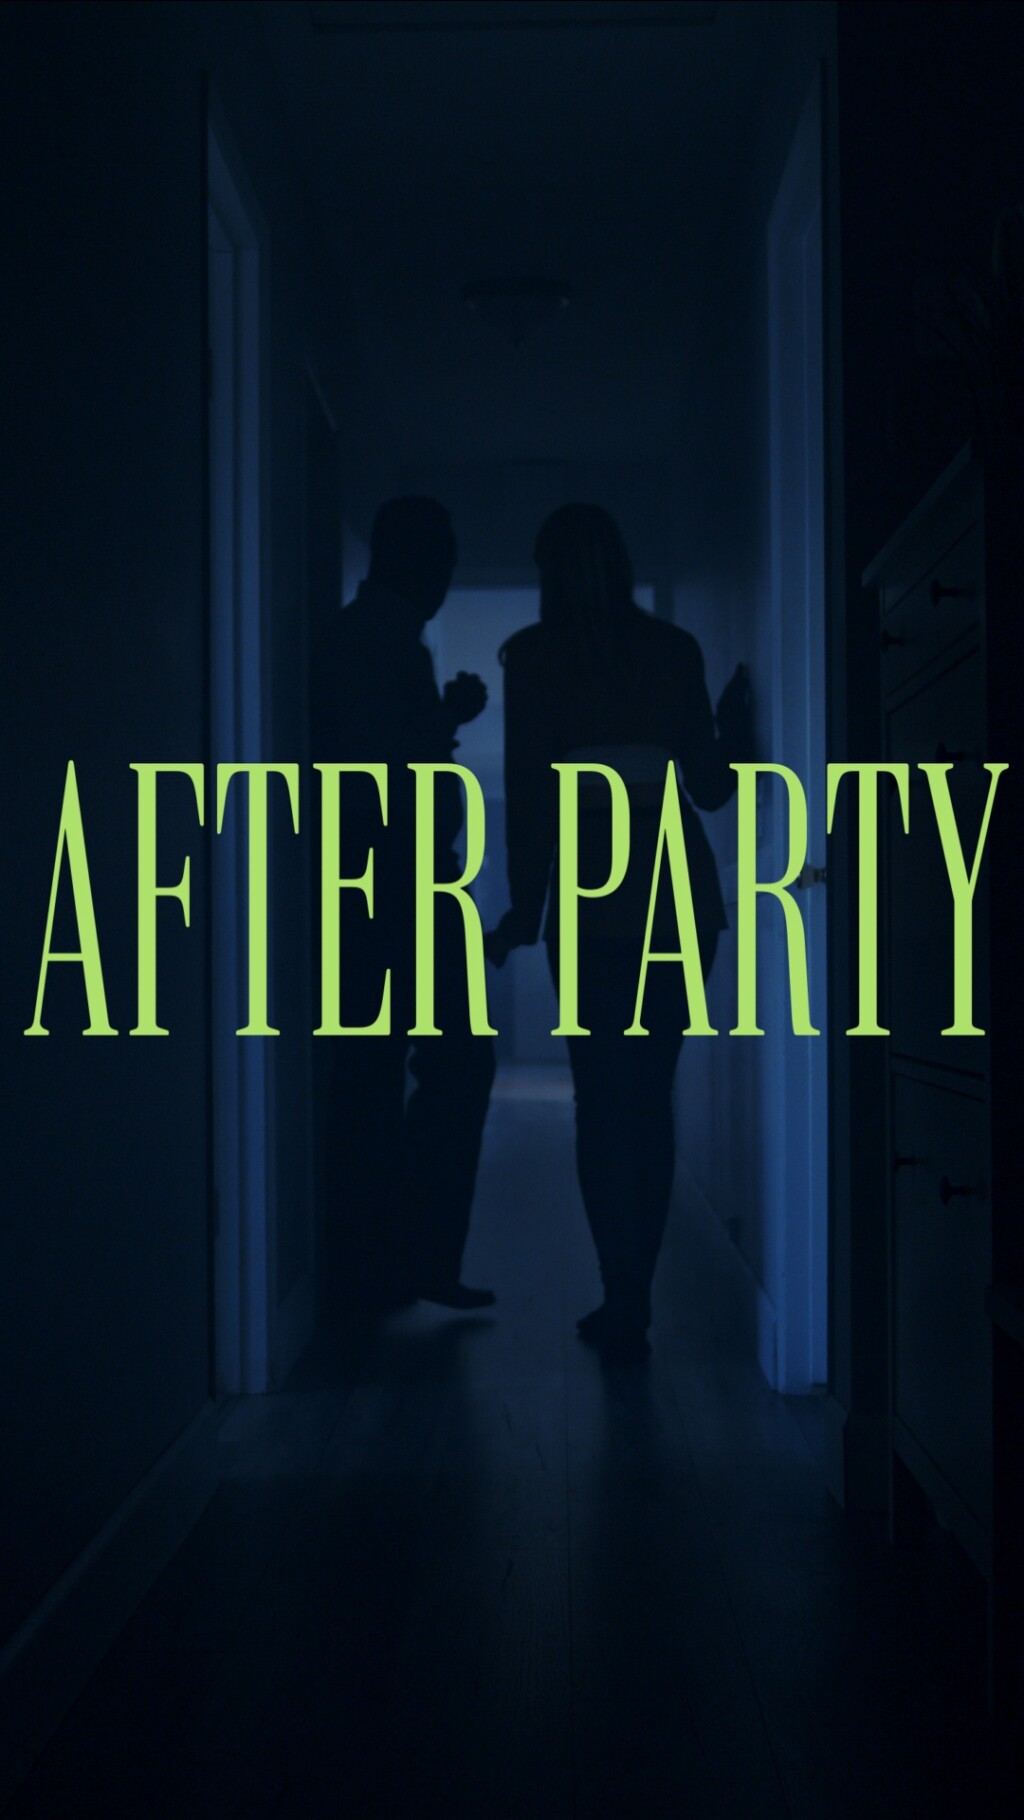 Filmposter for After Party